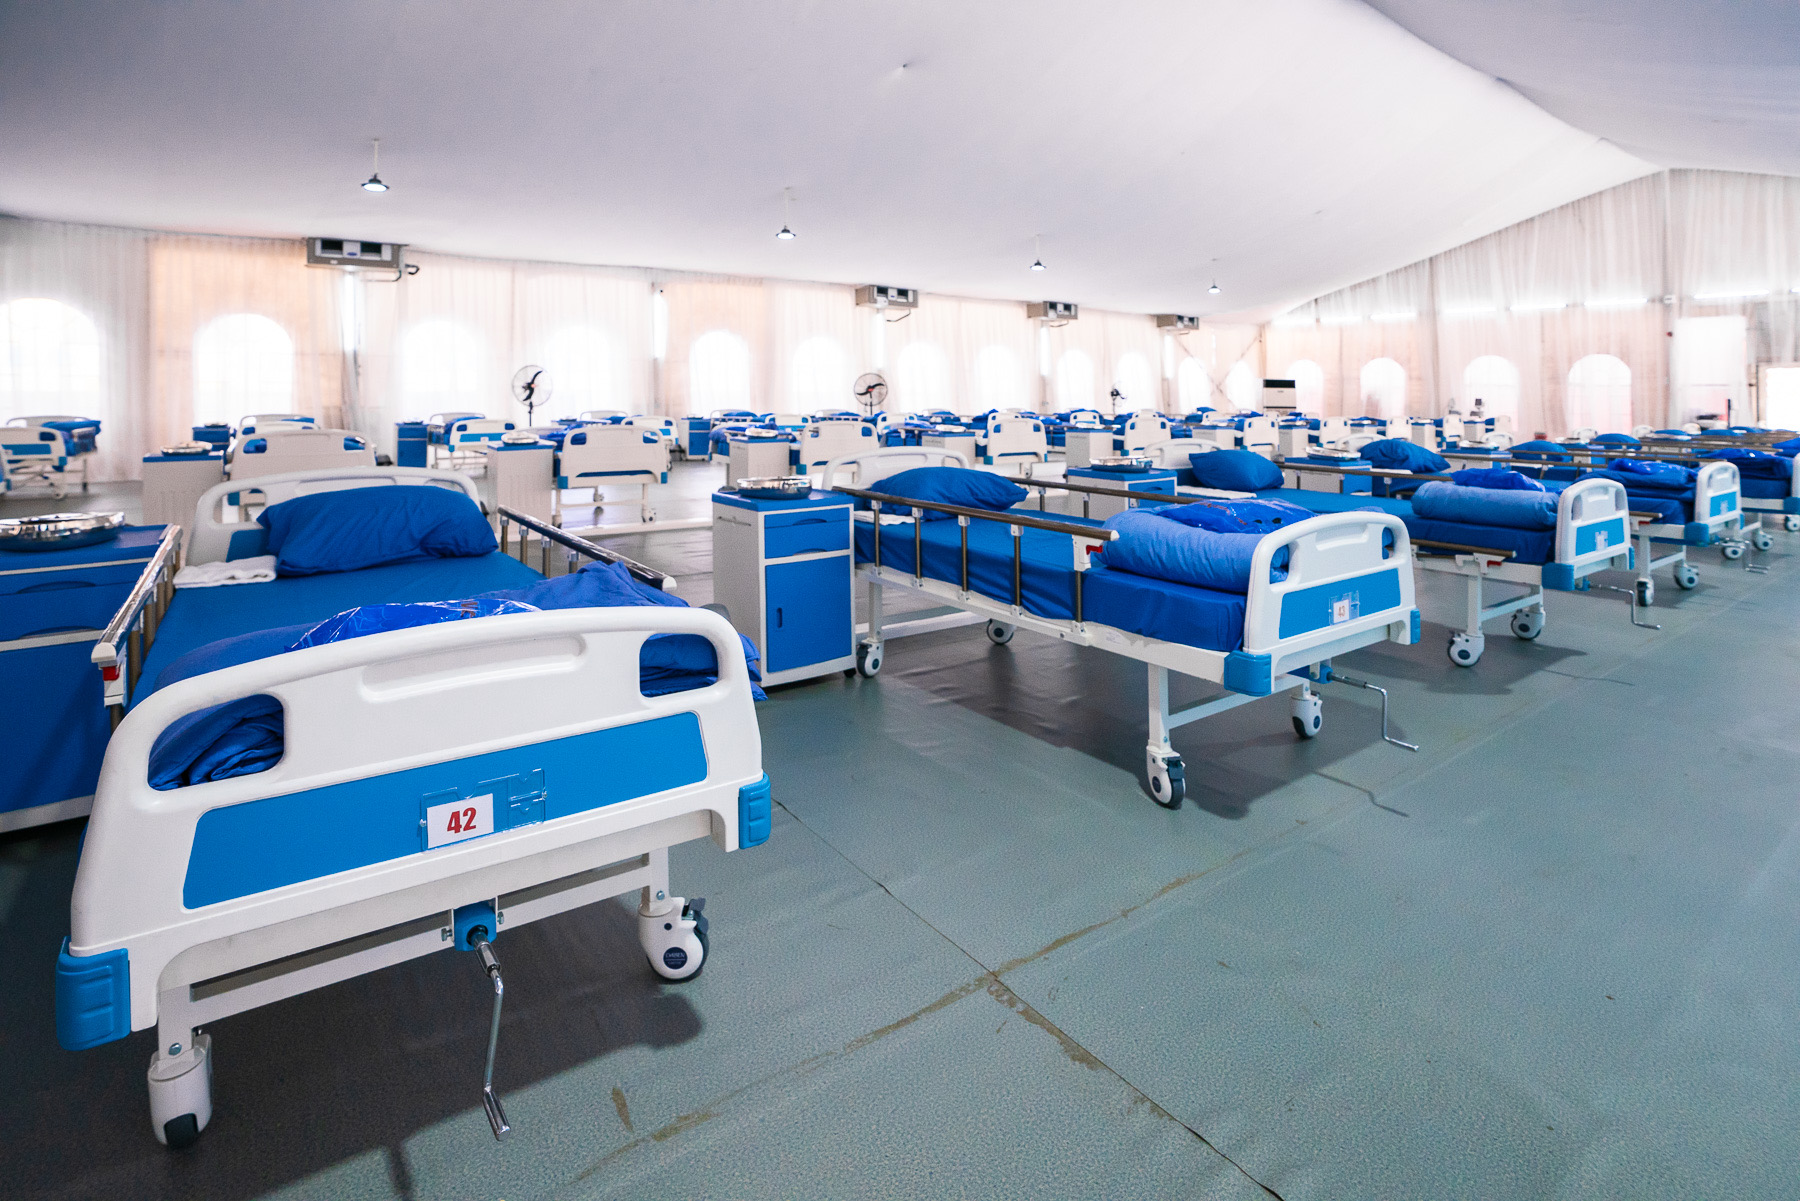 The 110-bed Isolation Center at Mobolaji Johnoson, Stadium, Onikan, Lagos Island, constructed by the Lagos State Government and Guaranty Trust Bank, unveiled on Saturday, March 28, 2020.